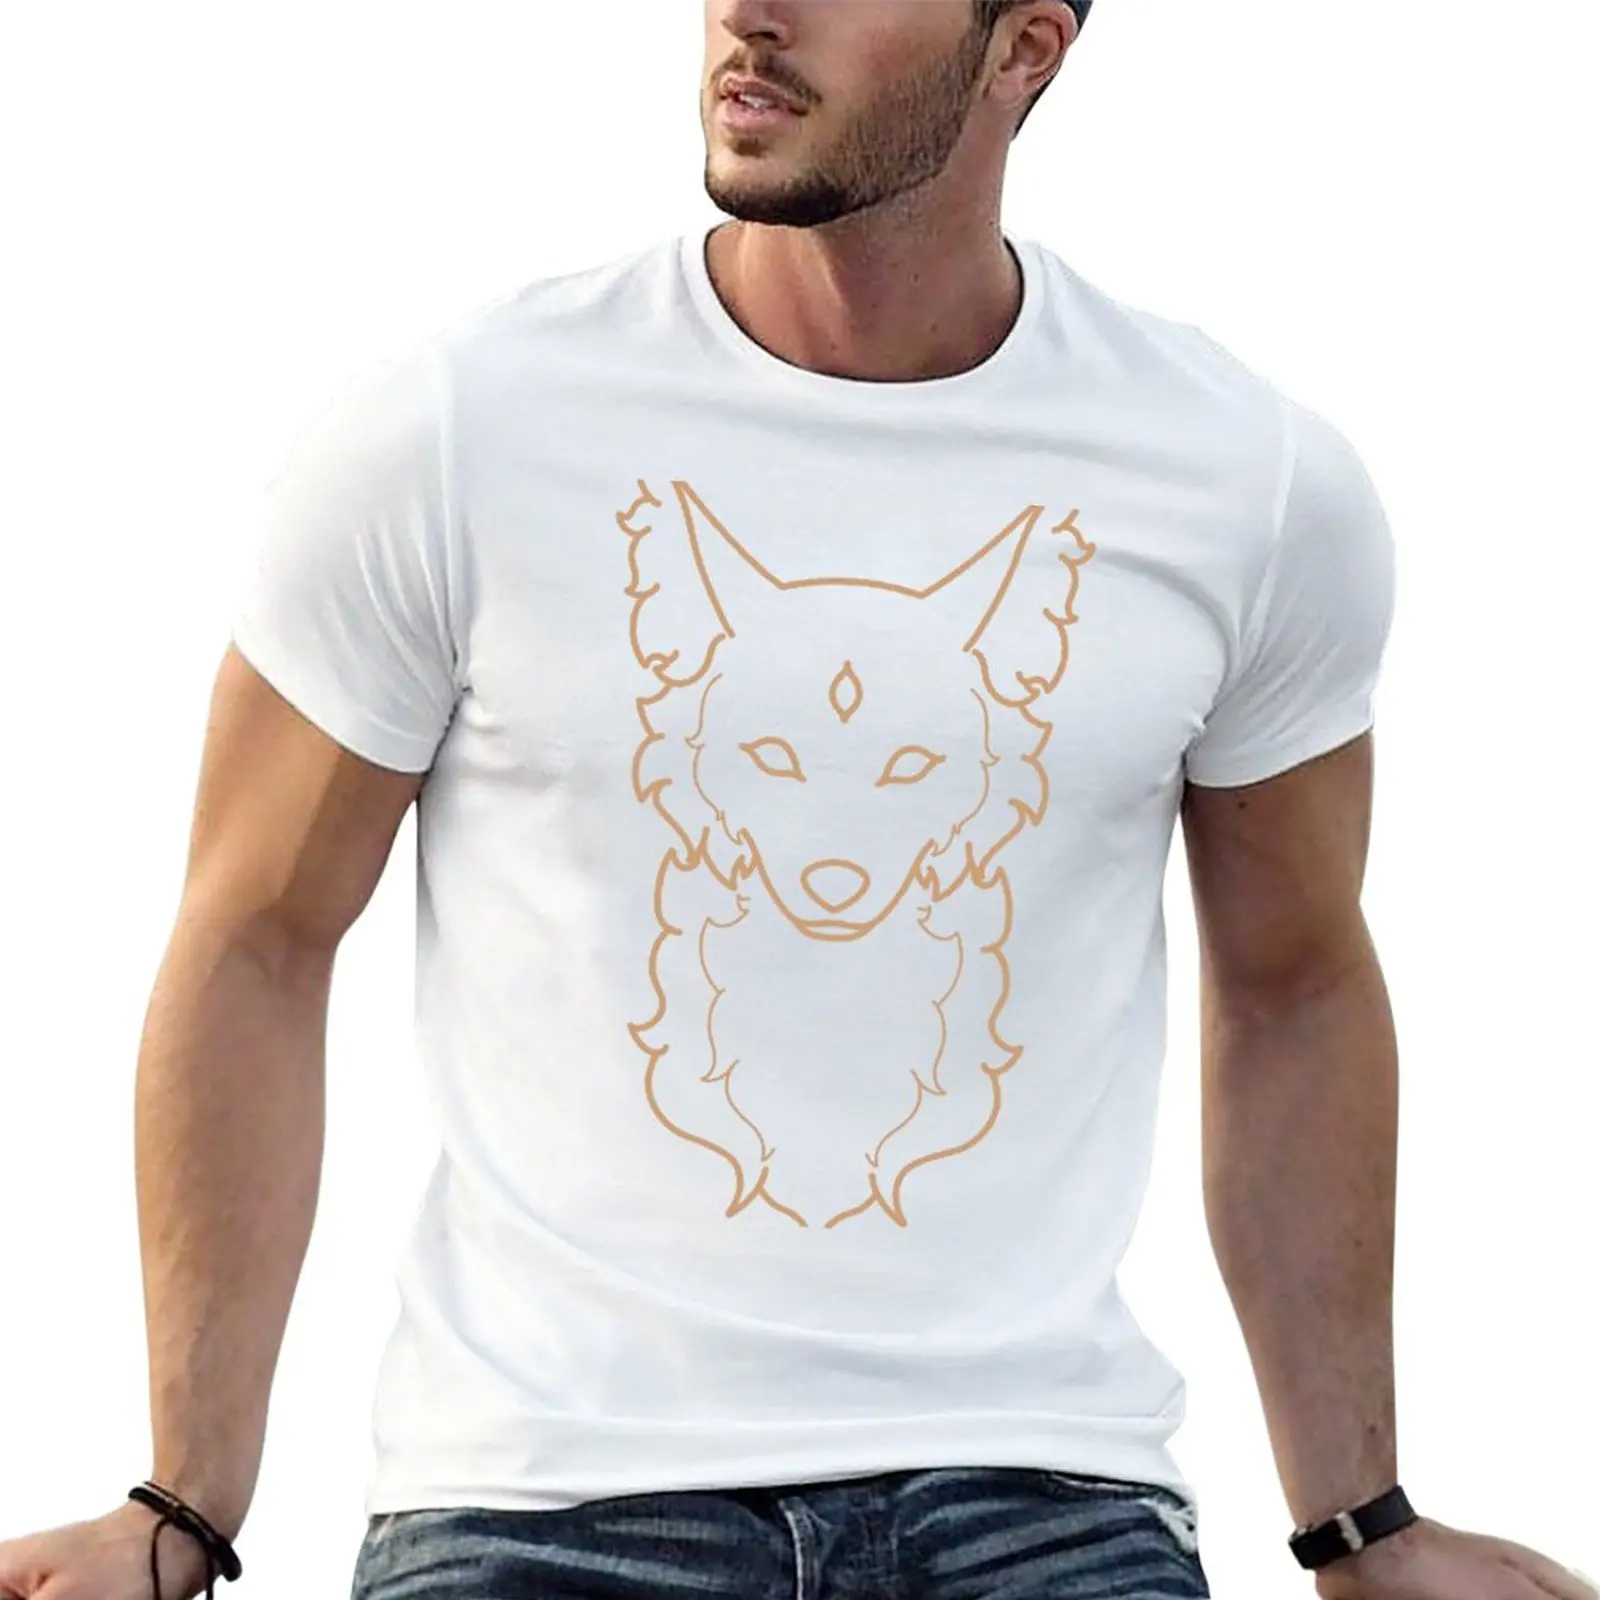 

Cryptic Coyote | Tan T-Shirt Short sleeve tees sports fan t-shirts mens clothes